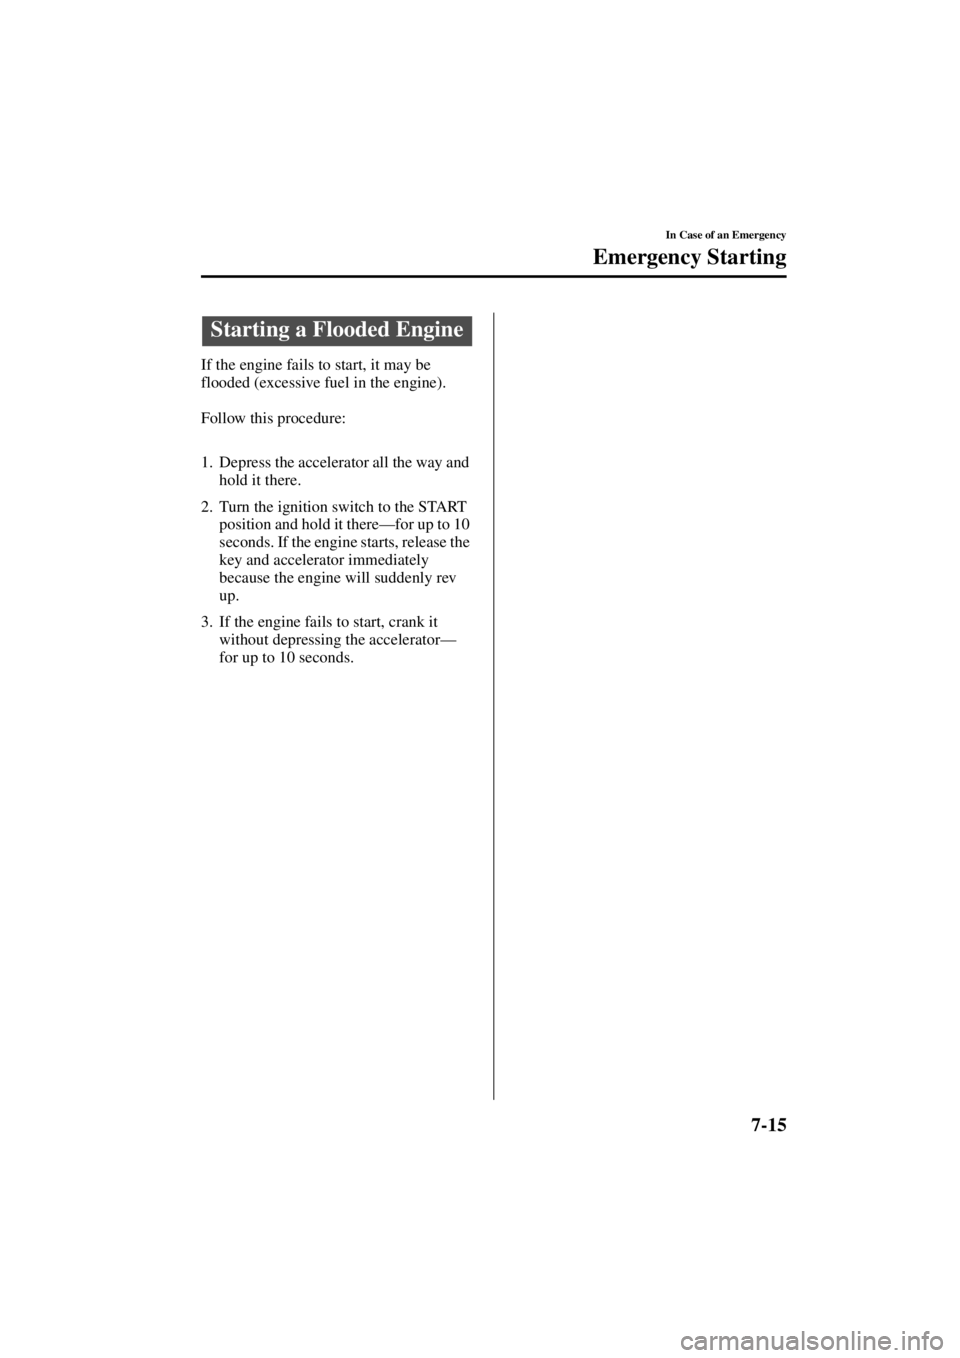 MAZDA MODEL 3 5-DOOR 2004  Owners Manual 7-15
In Case of an Emergency
Form No. 8S18-EA-03I
Emergency Starting
If the engine fails to start, it may be 
flooded (excessive fuel in the engine).
Follow this procedure:
1. Depress the accelerator 